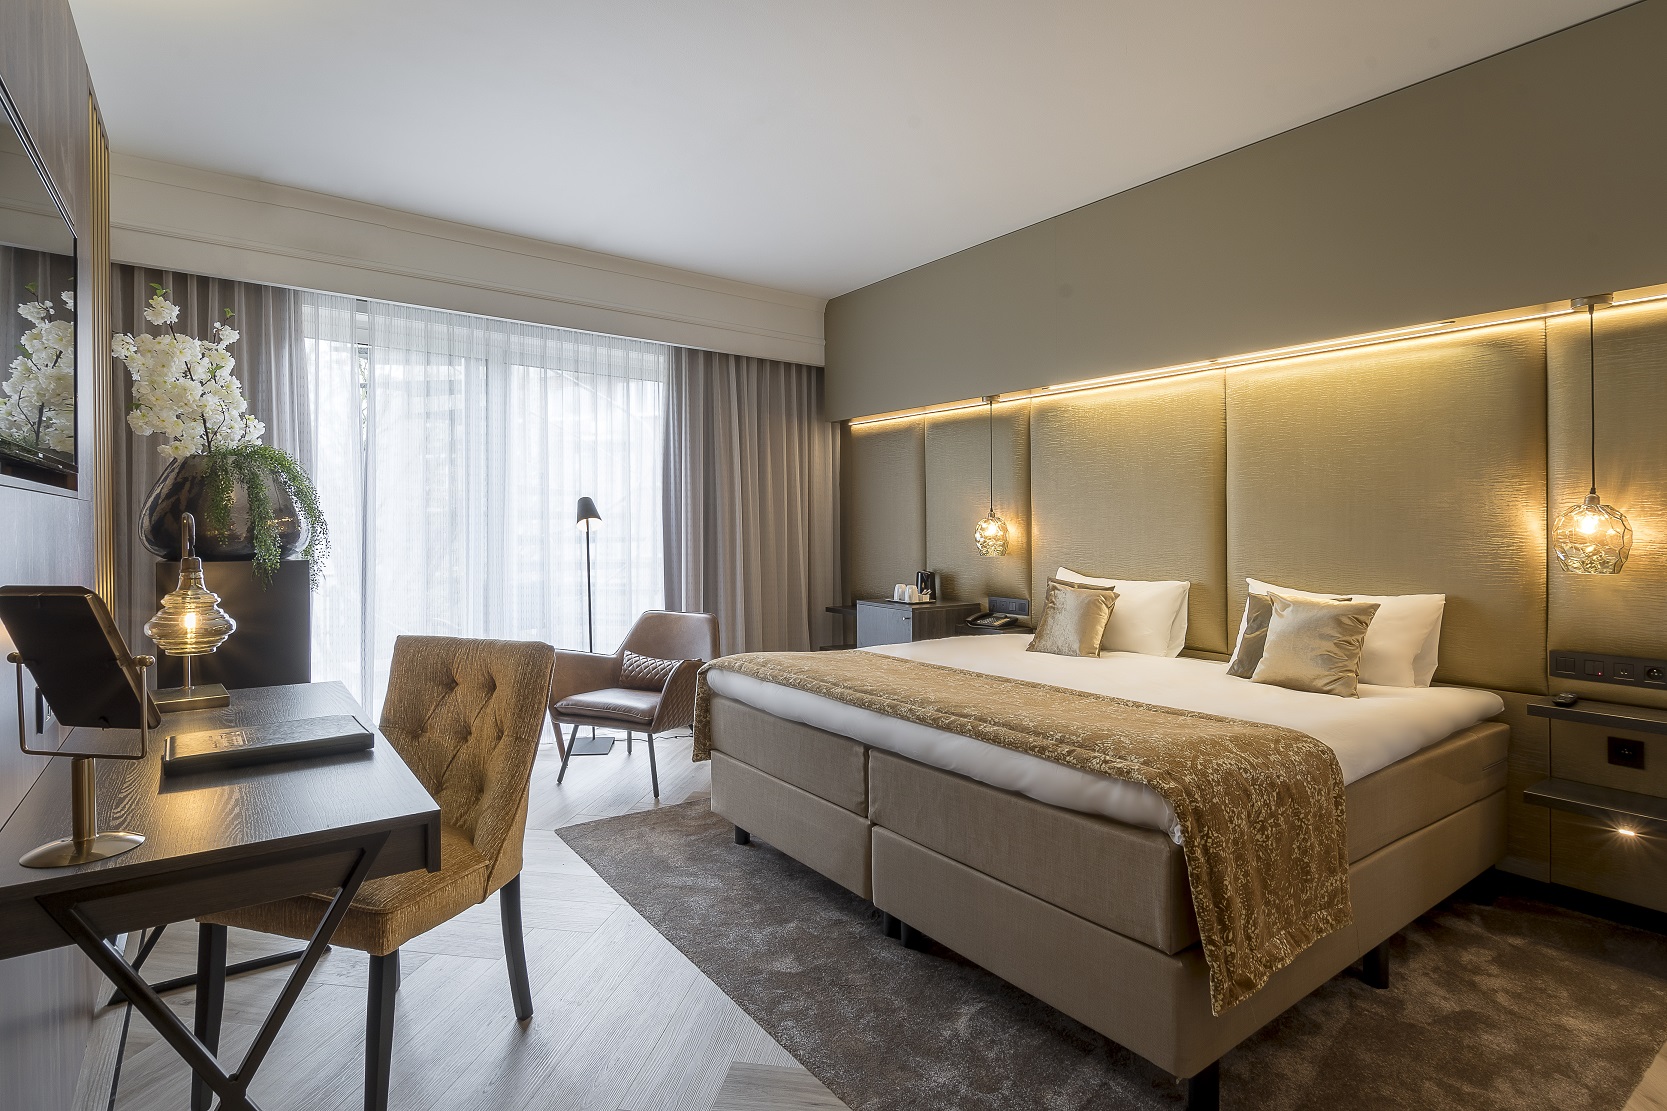 The Plaza Hotel Antwerp <br/>135.00 ew <br/> <a href='http://vakantieoplossing.nl/outpage/?id=036376778b0467763dcd287edff40c8b' target='_blank'>View Details</a>